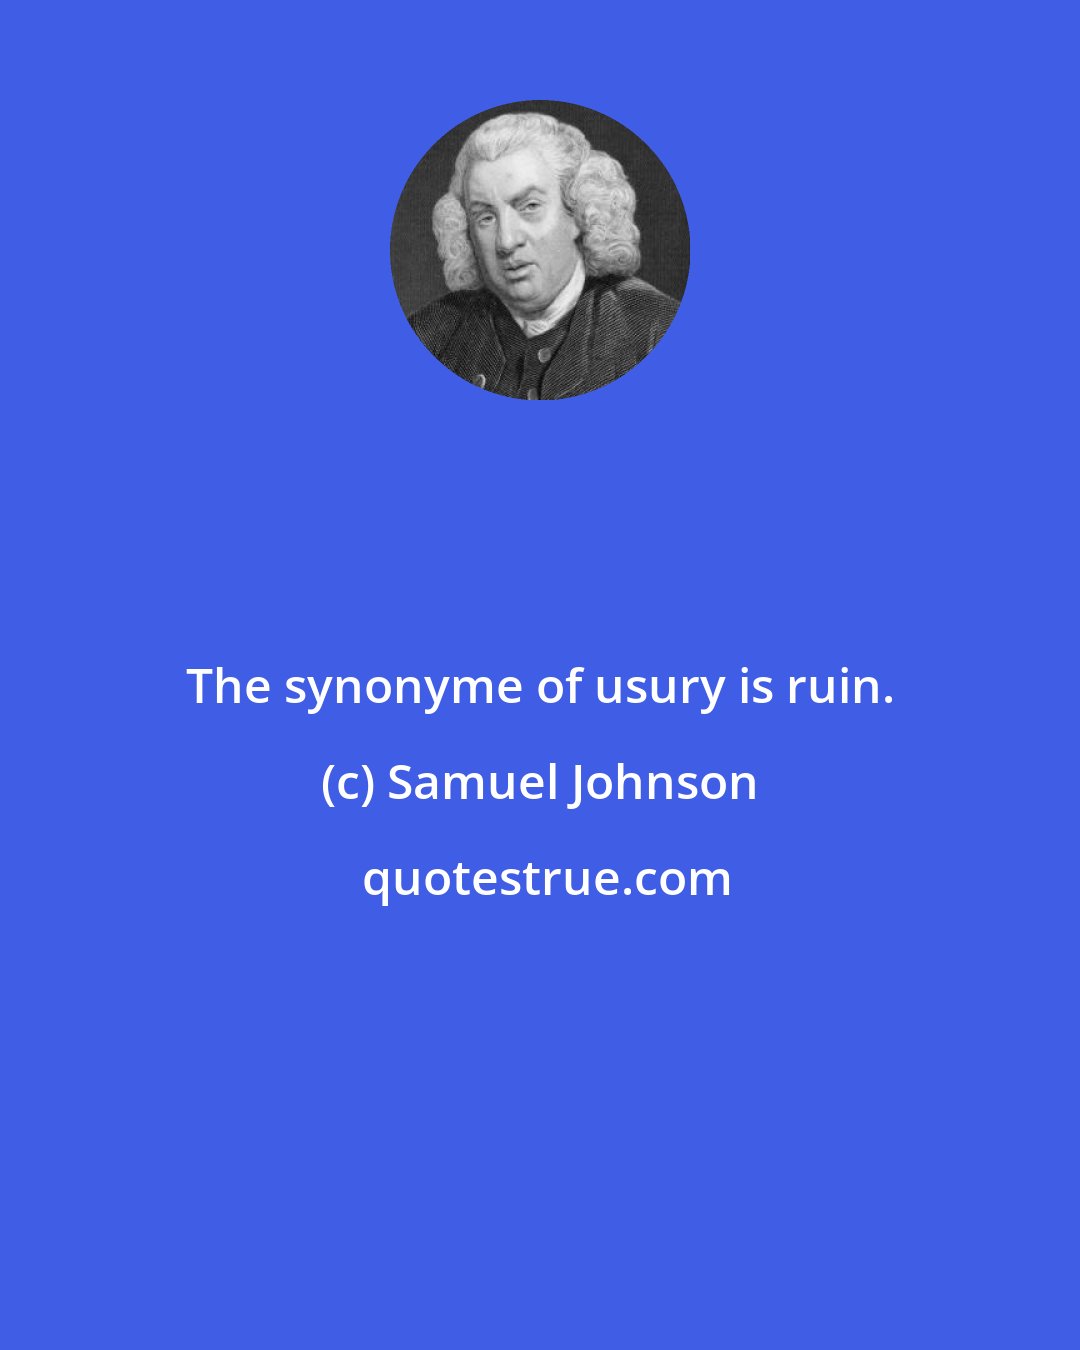 Samuel Johnson: The synonyme of usury is ruin.